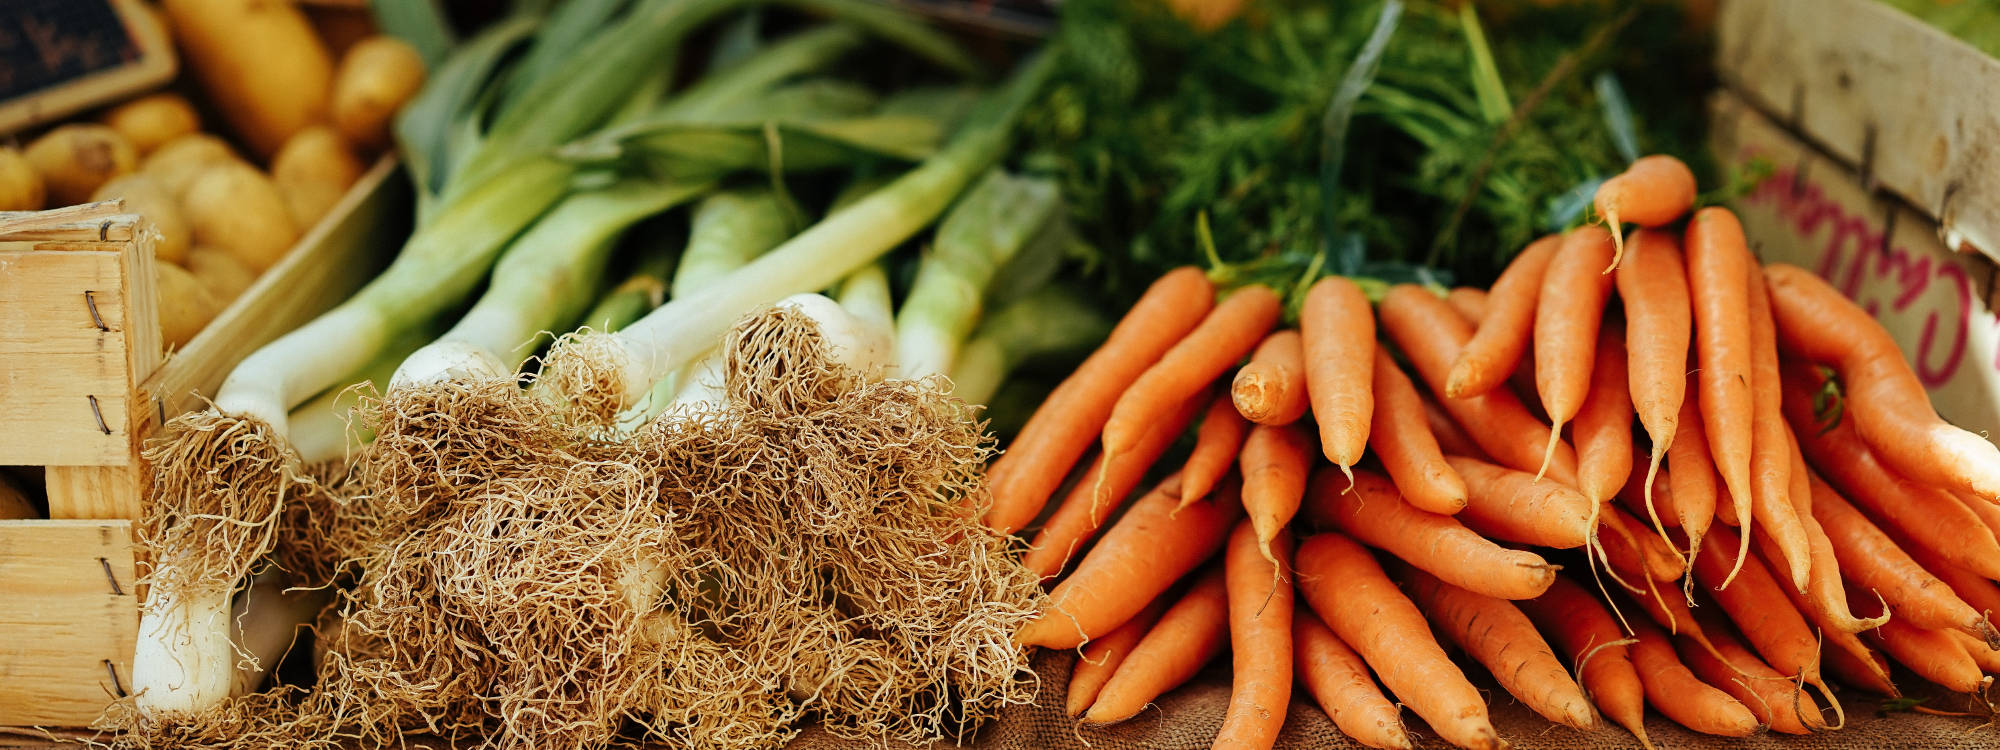 Sourcing healthy, organic, locally grown food is part of Conscious Living